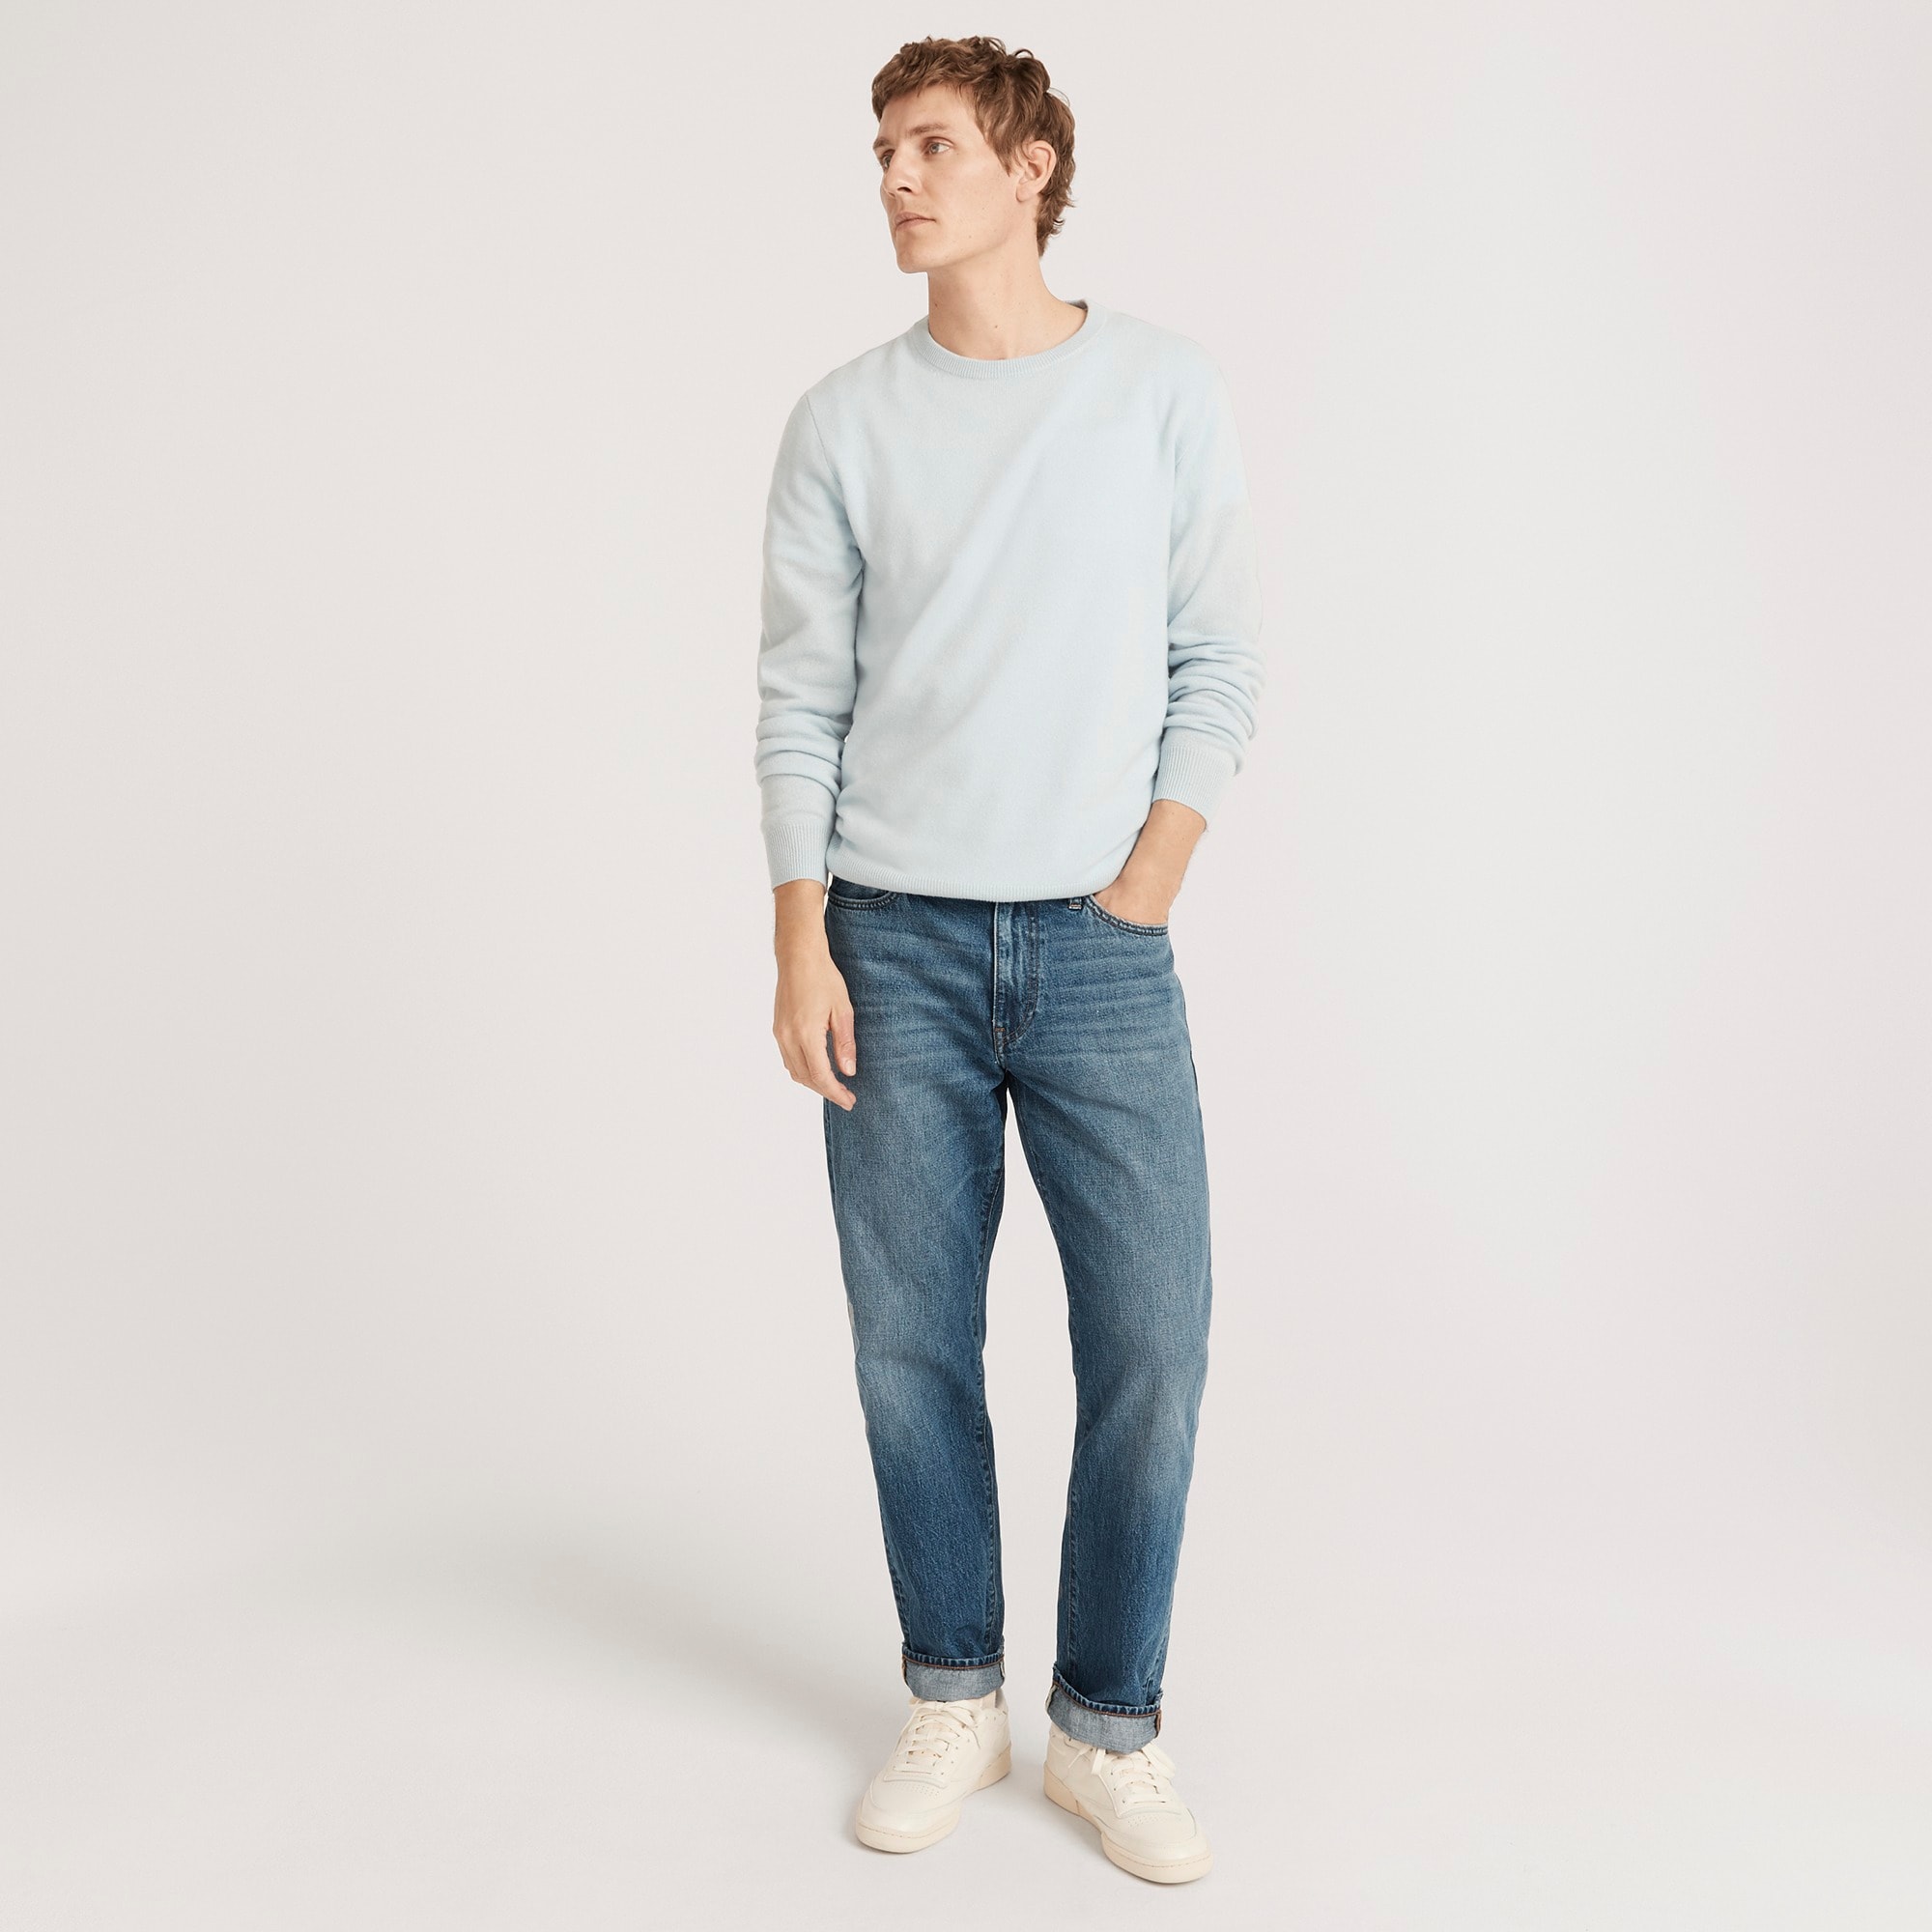 mens Classic Relaxed-fit jean in two-year wash